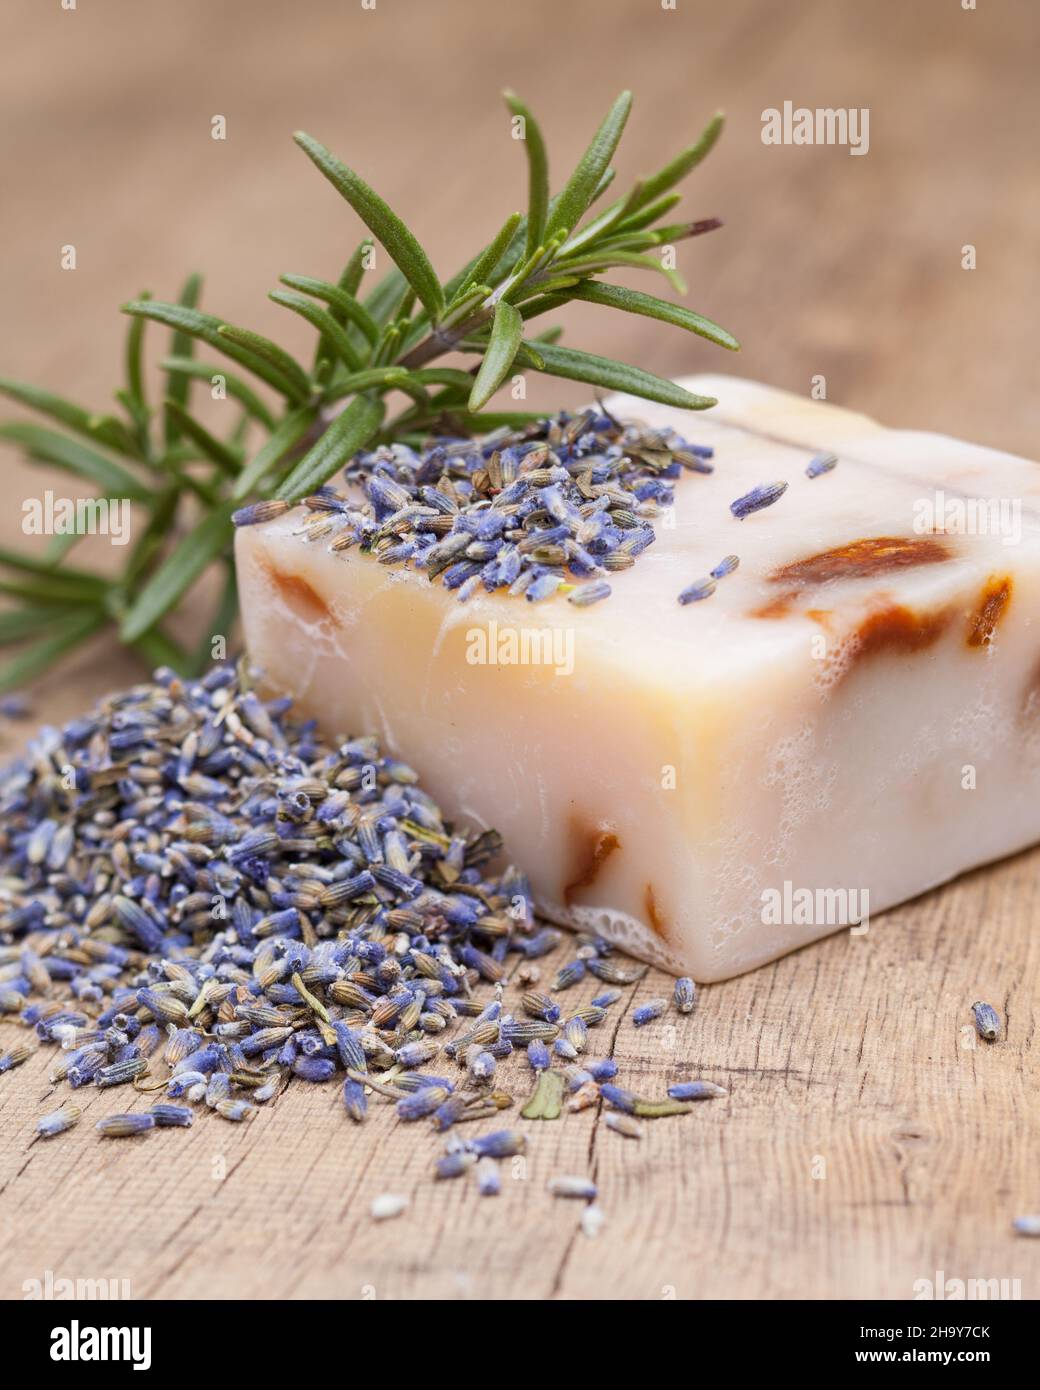 soap, boil, lavender, itself, soaps, homemade, made, country Life, rosemary, branch out flowers, two, many, myself, crafts, old, traditional, horizont Stock Photo